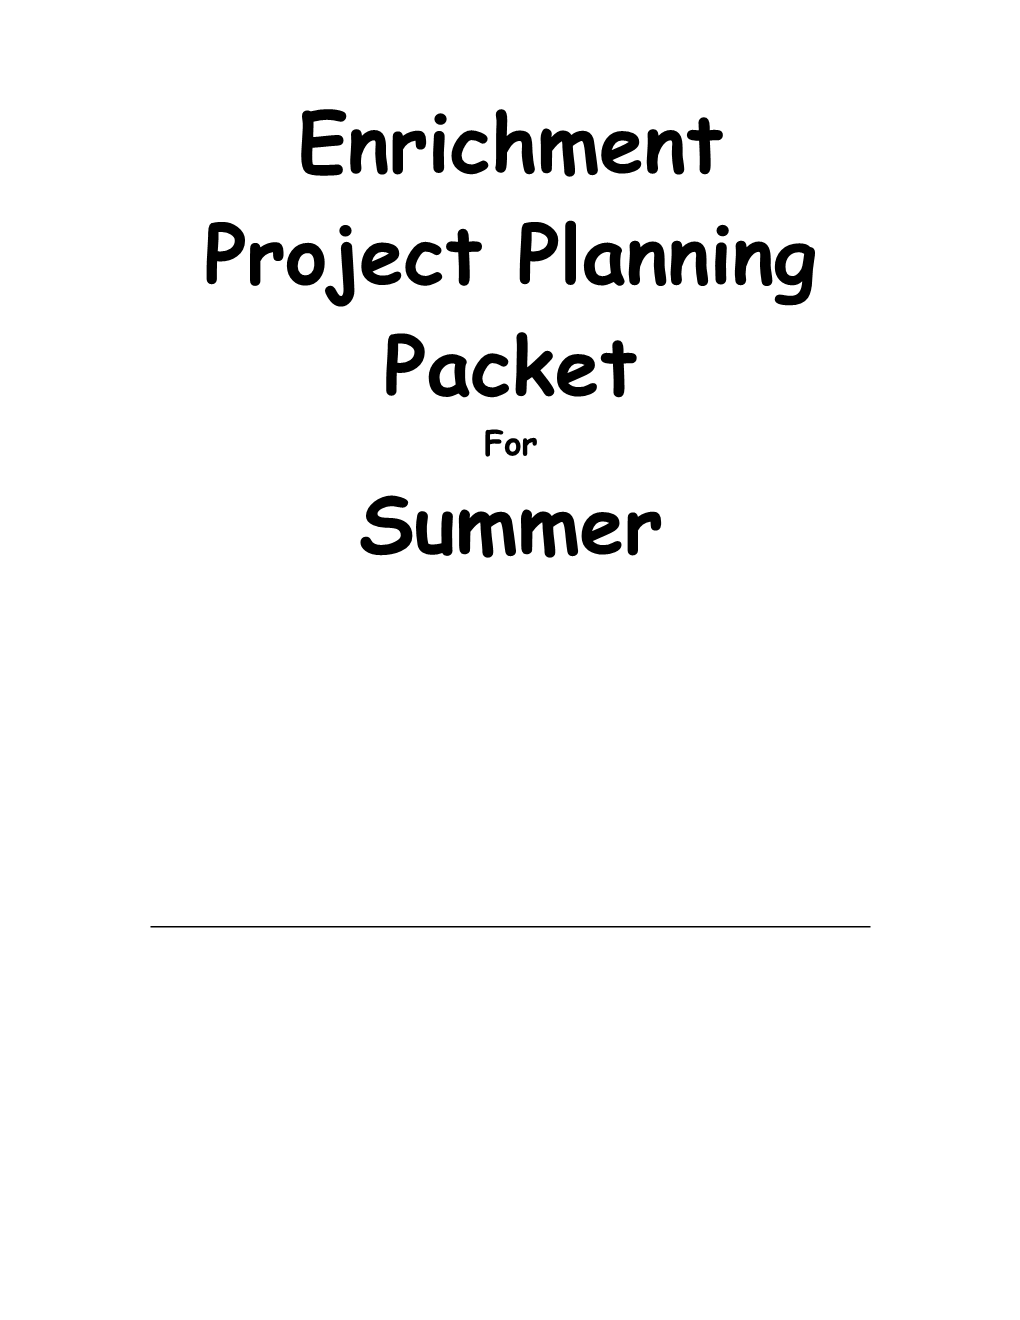 Enrichment Project Planning Packet